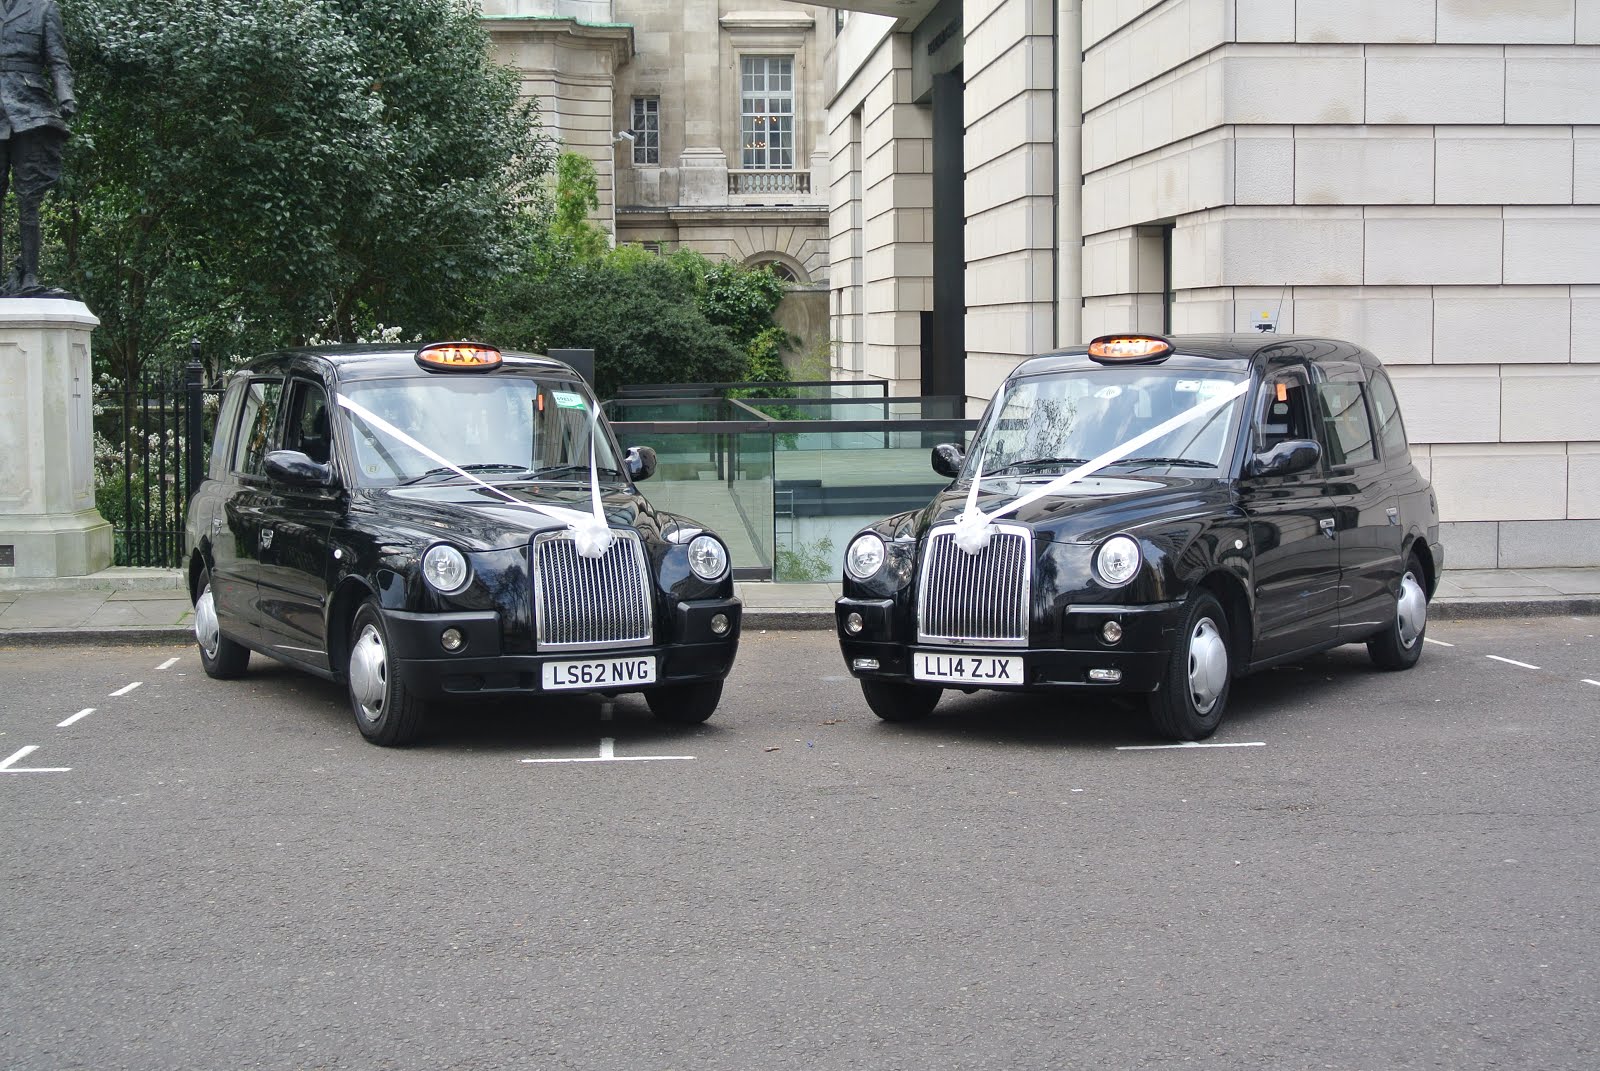 London Corporate Cabs